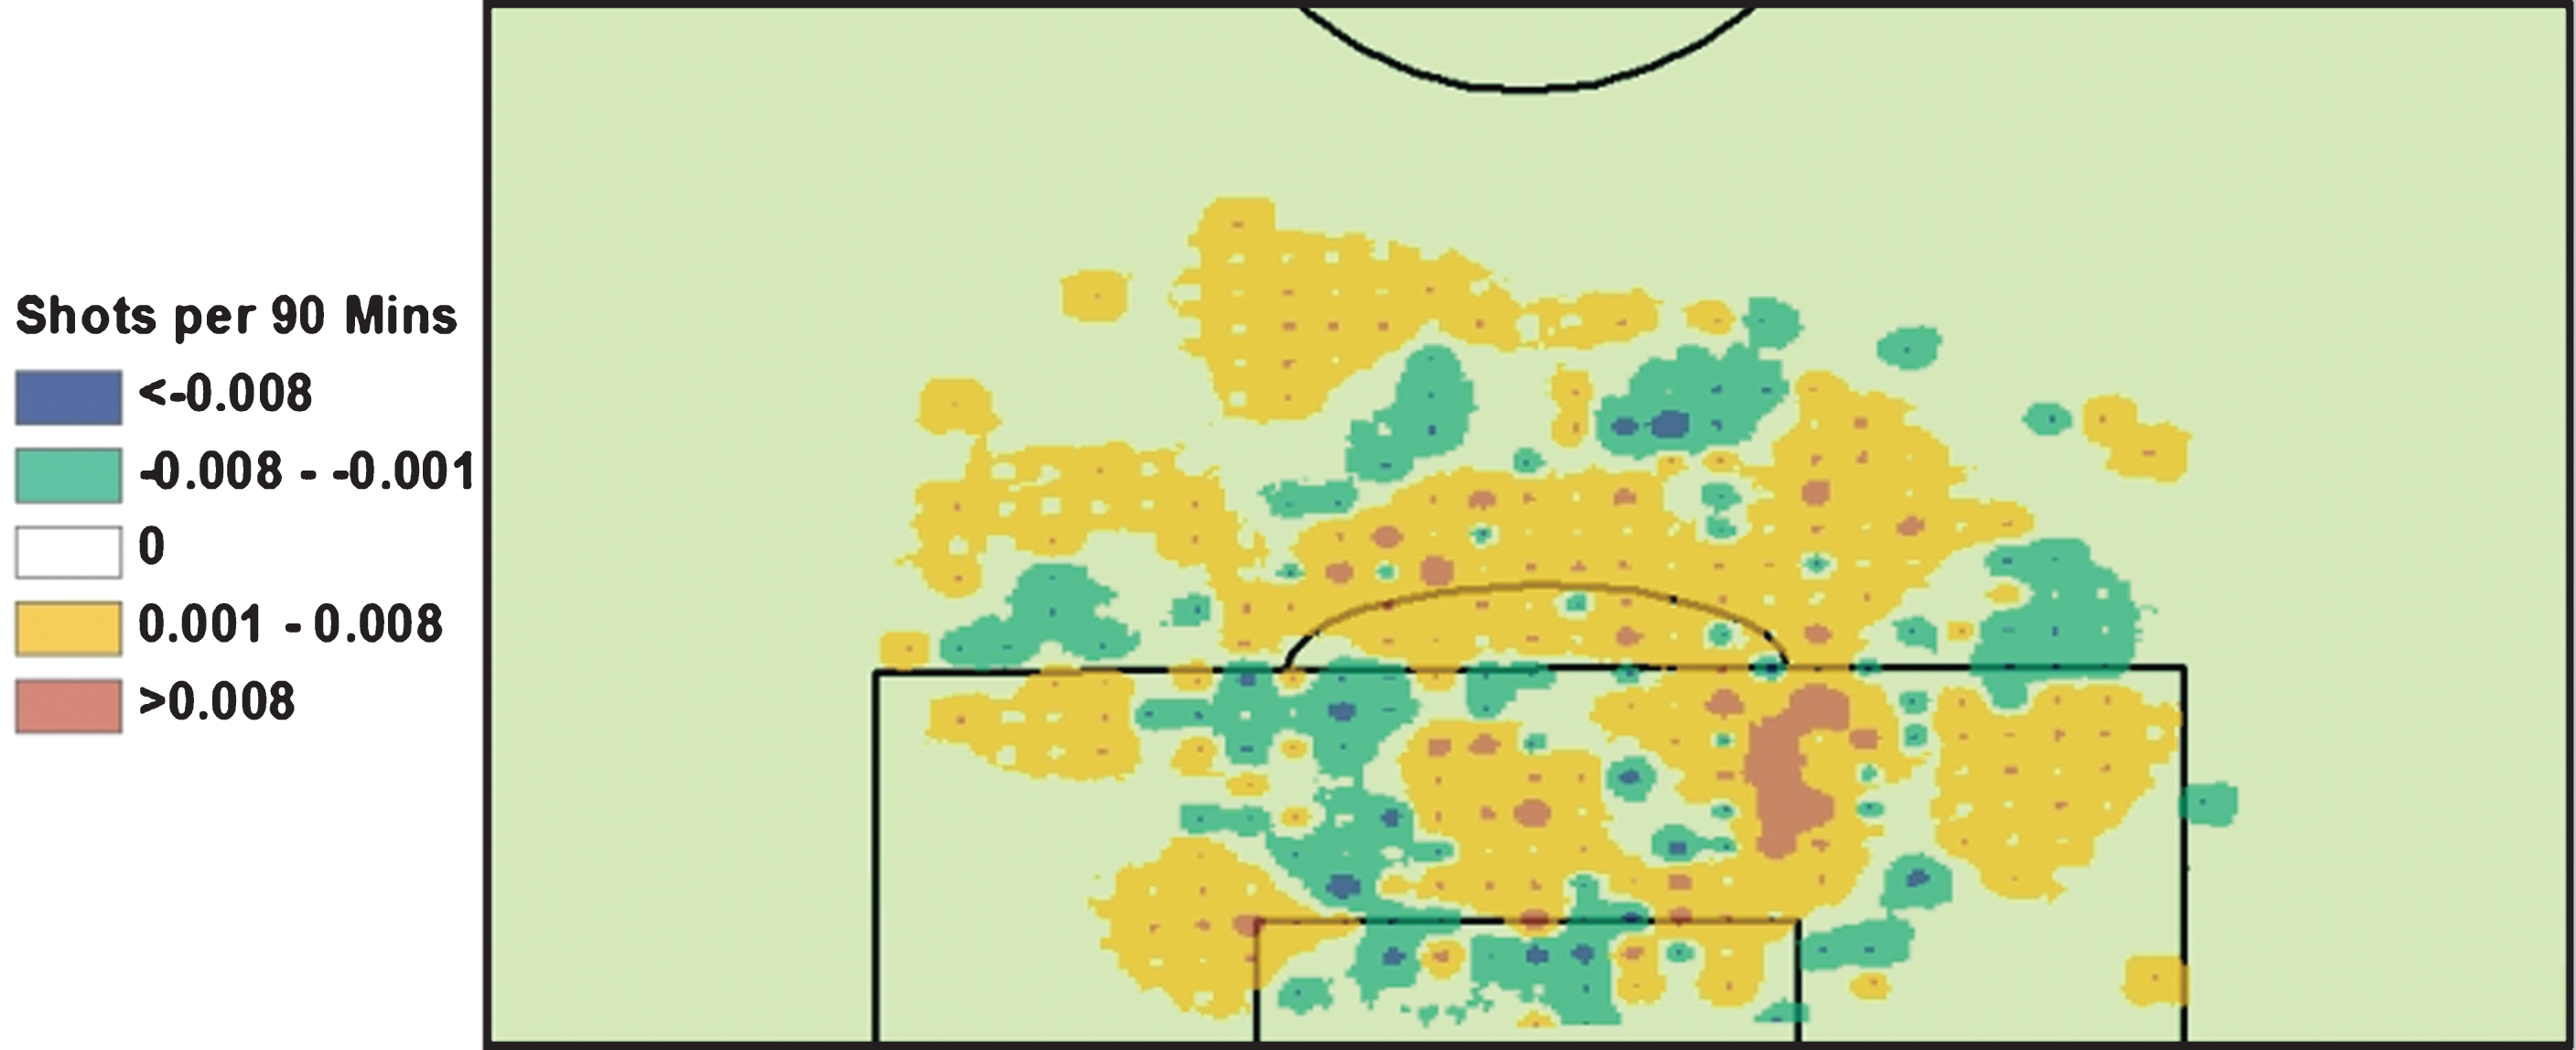 Clemens Fritz Shots conceded. Red/Orange are areas where more shots are conceded when Fritz is on the pitch Green/Blue are areas where more shots are conceded when Fritz is off the pitch.